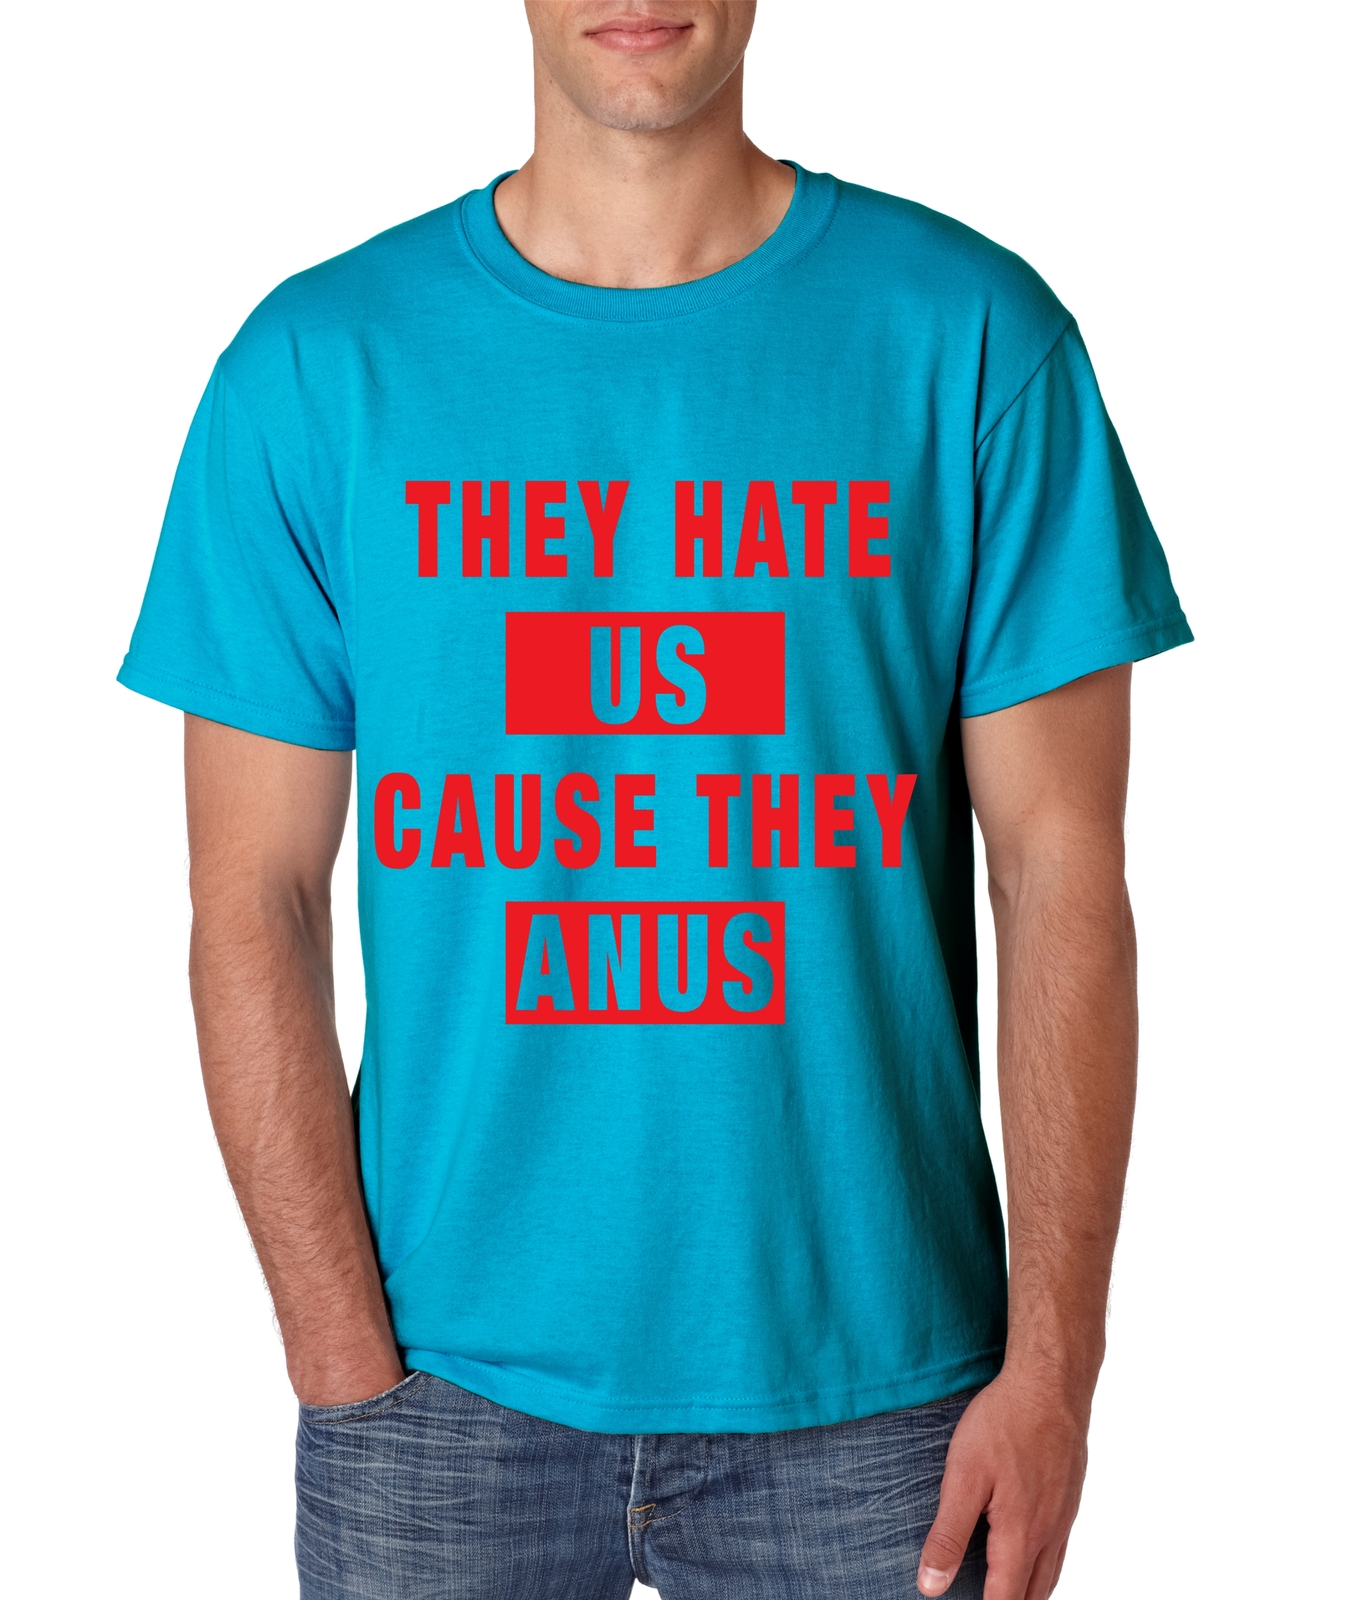 Men's Tee Shirt They Hate Us Cause They Anus - T-Shirts, Tank Tops